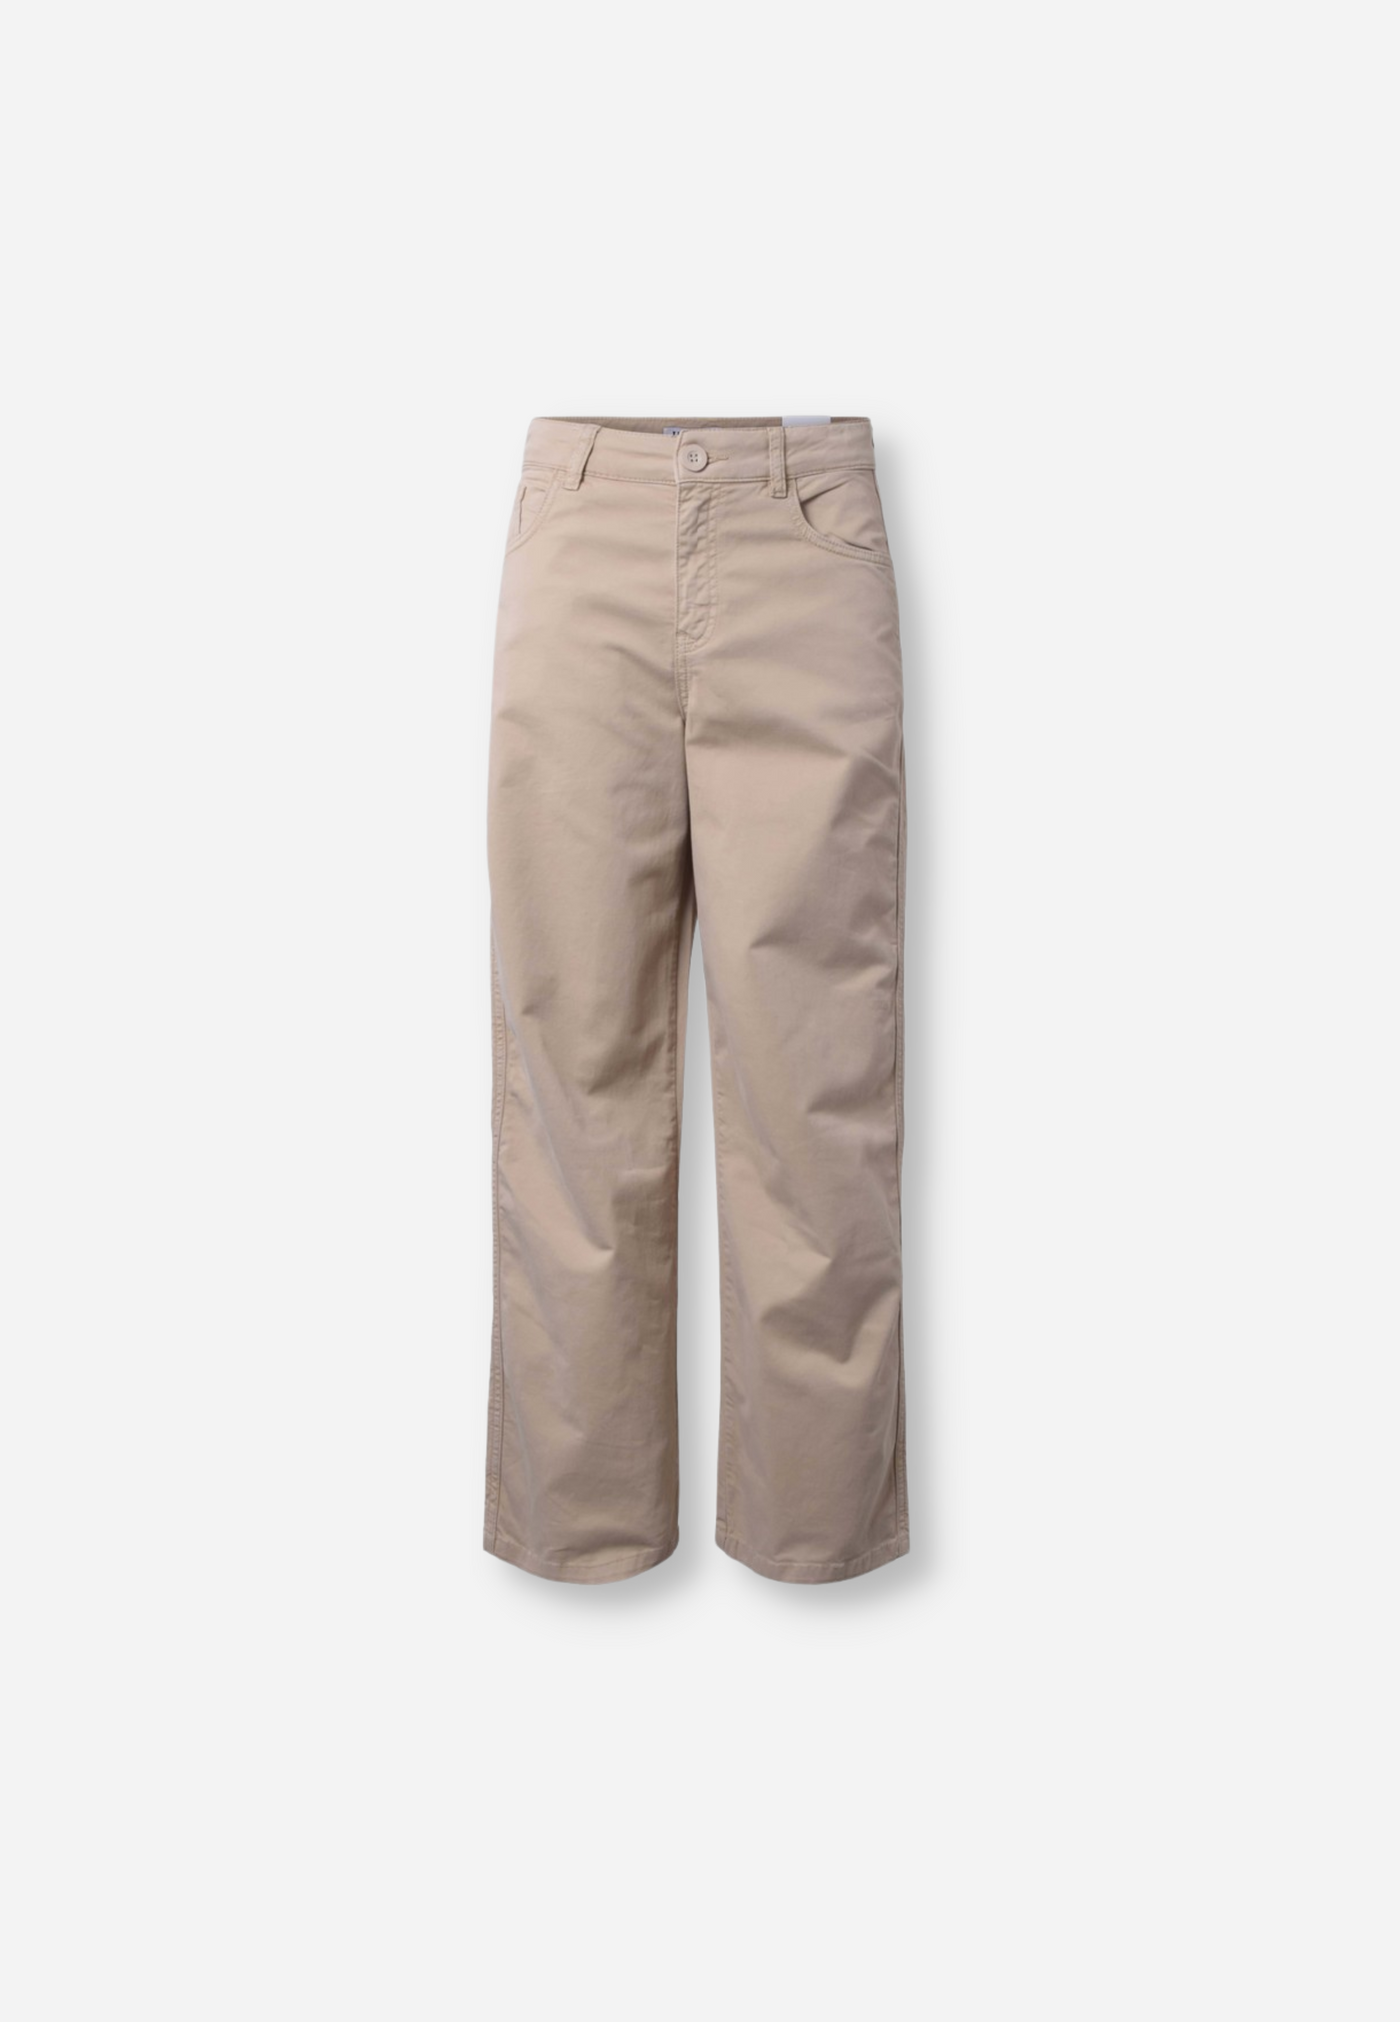 EXTRA LOOSE FIT PANTS - SAND